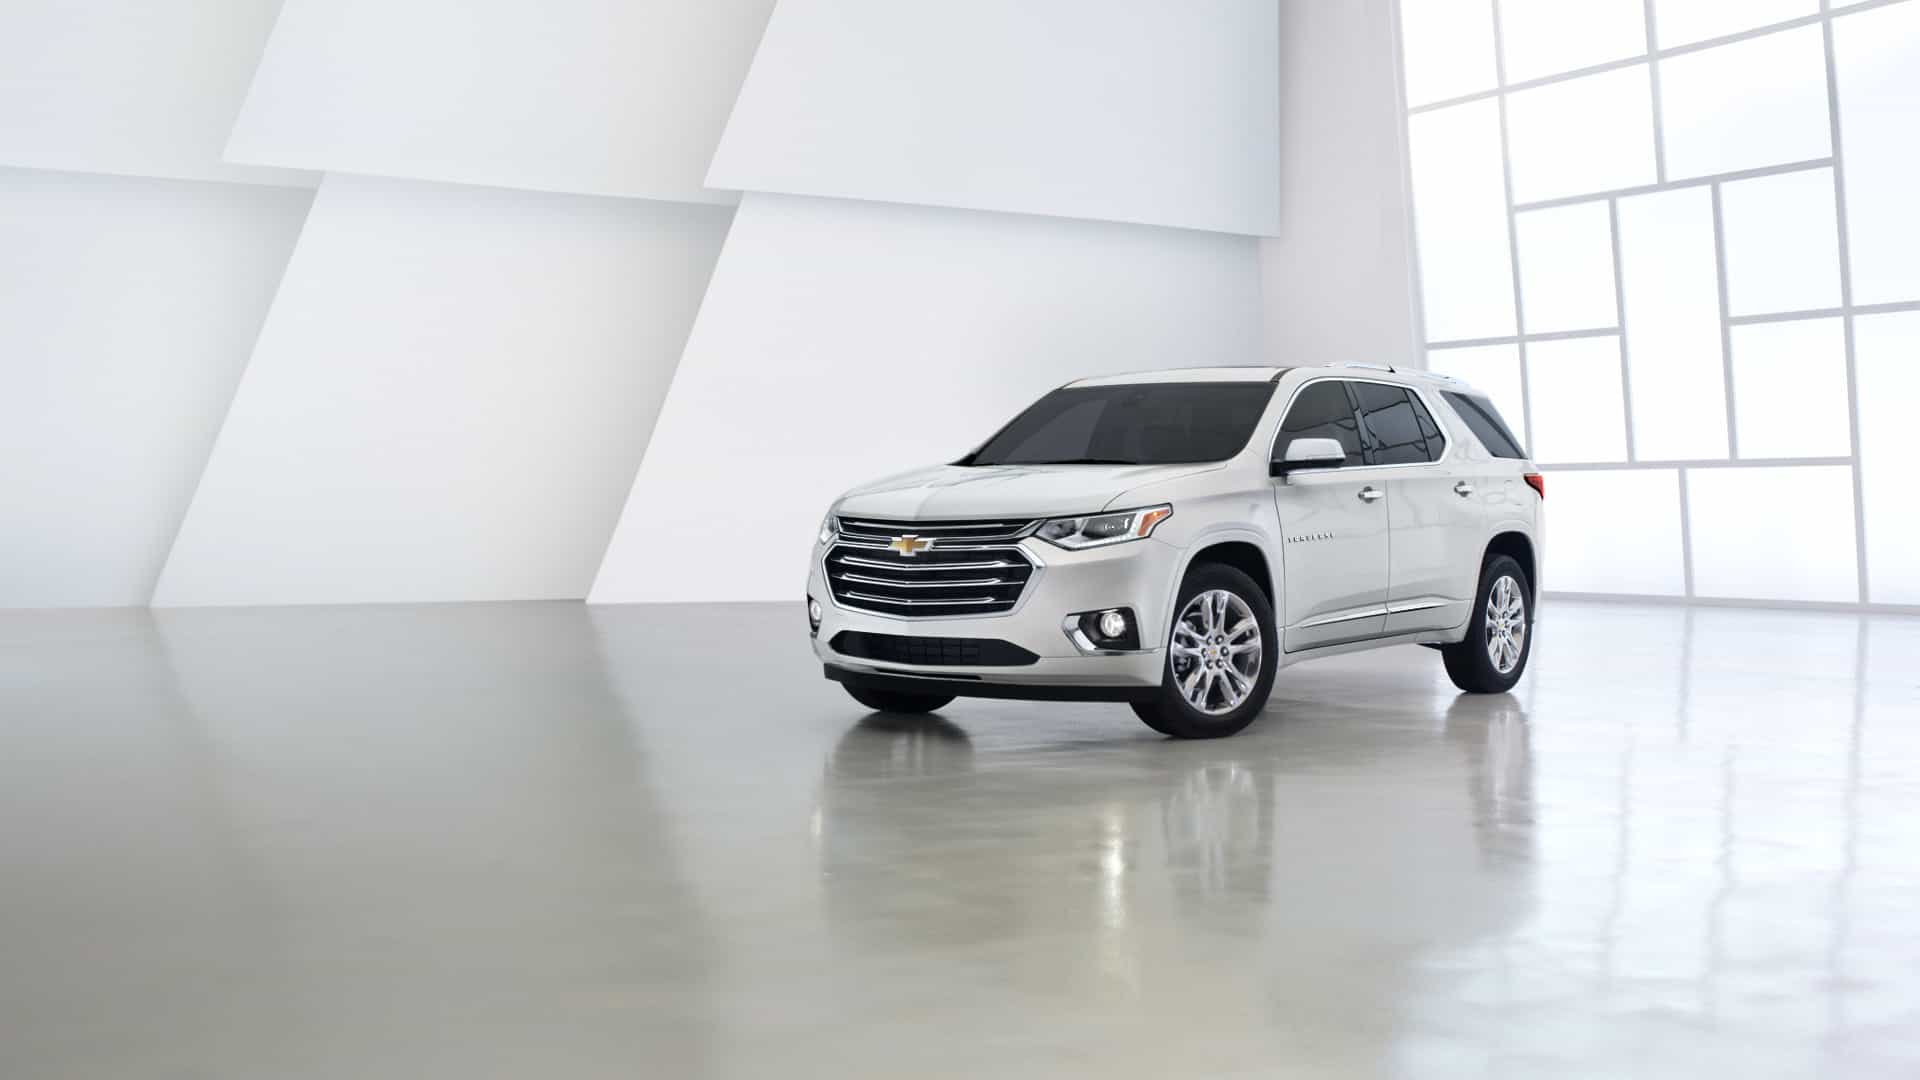 2019 Chevrolet Traverse Buyer’s Guide